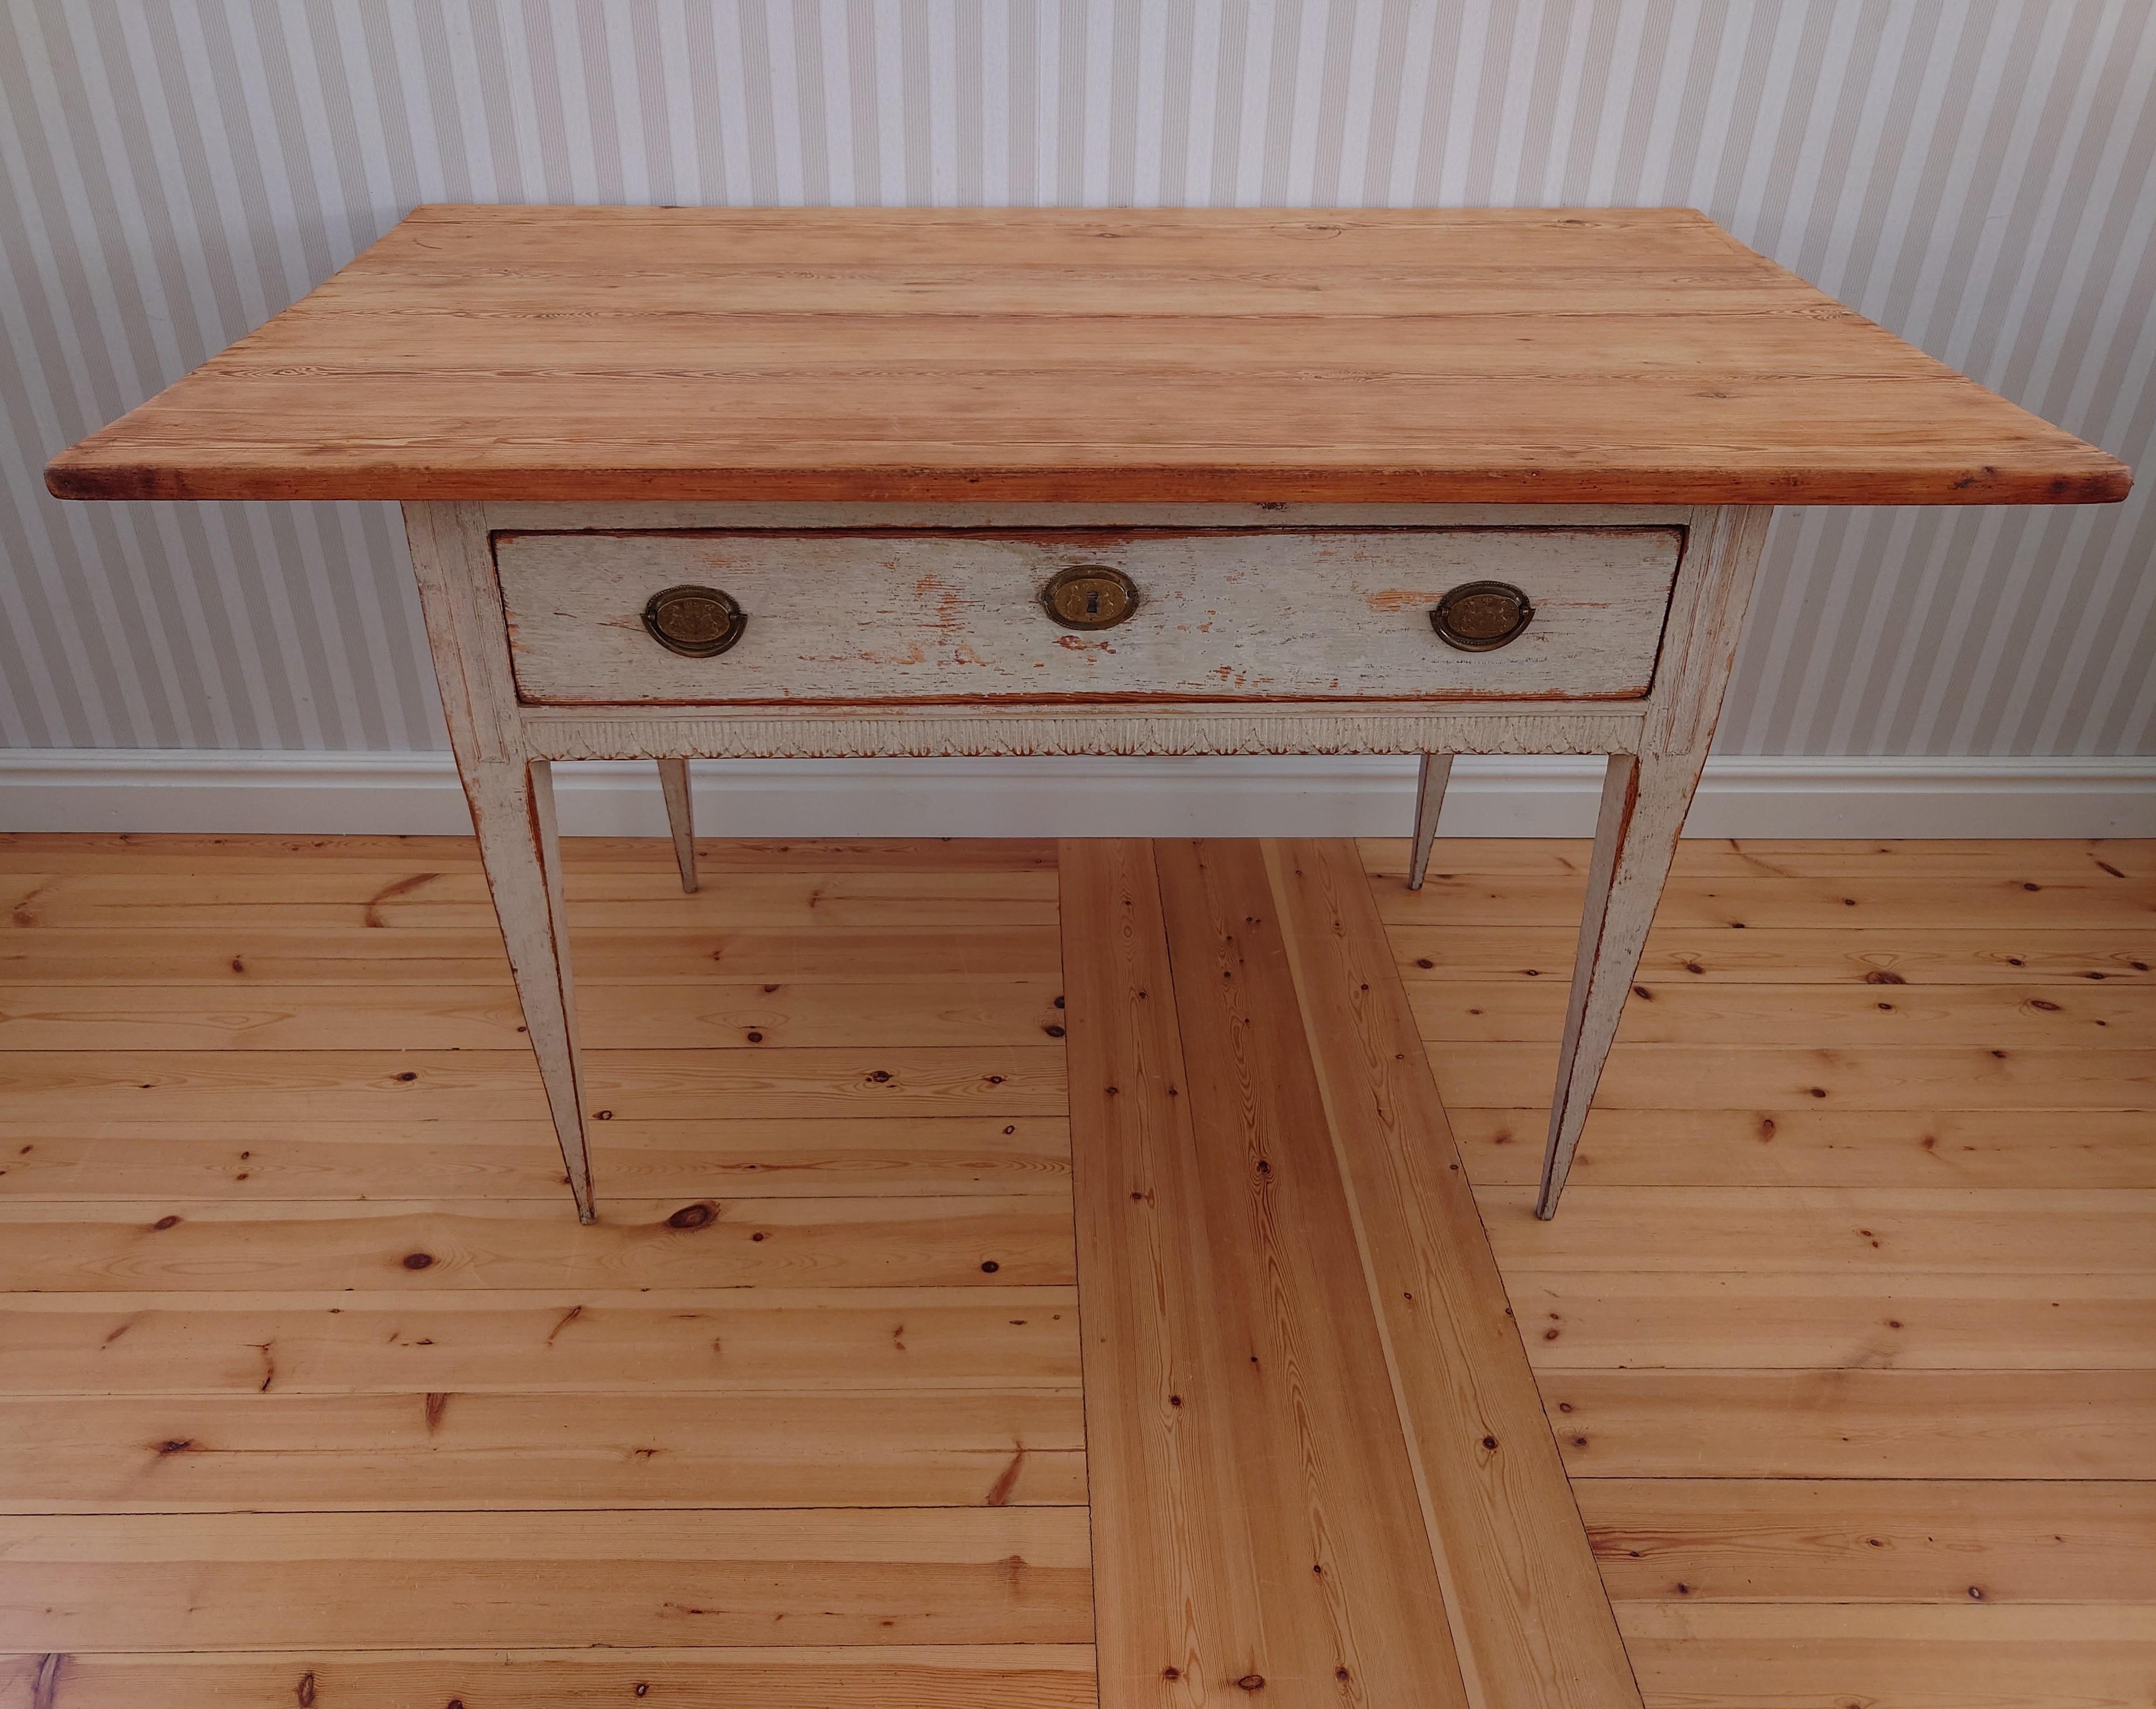 19th century Swedish Gustavian desk from Umeå Västerbotten, Northern Sweden.
A high-class & beautiful desk with wood-cut details & beautiful tapered legs.
The beautifully cut leaves are typical decor from the area.
Nice Gustavian desk scraped to